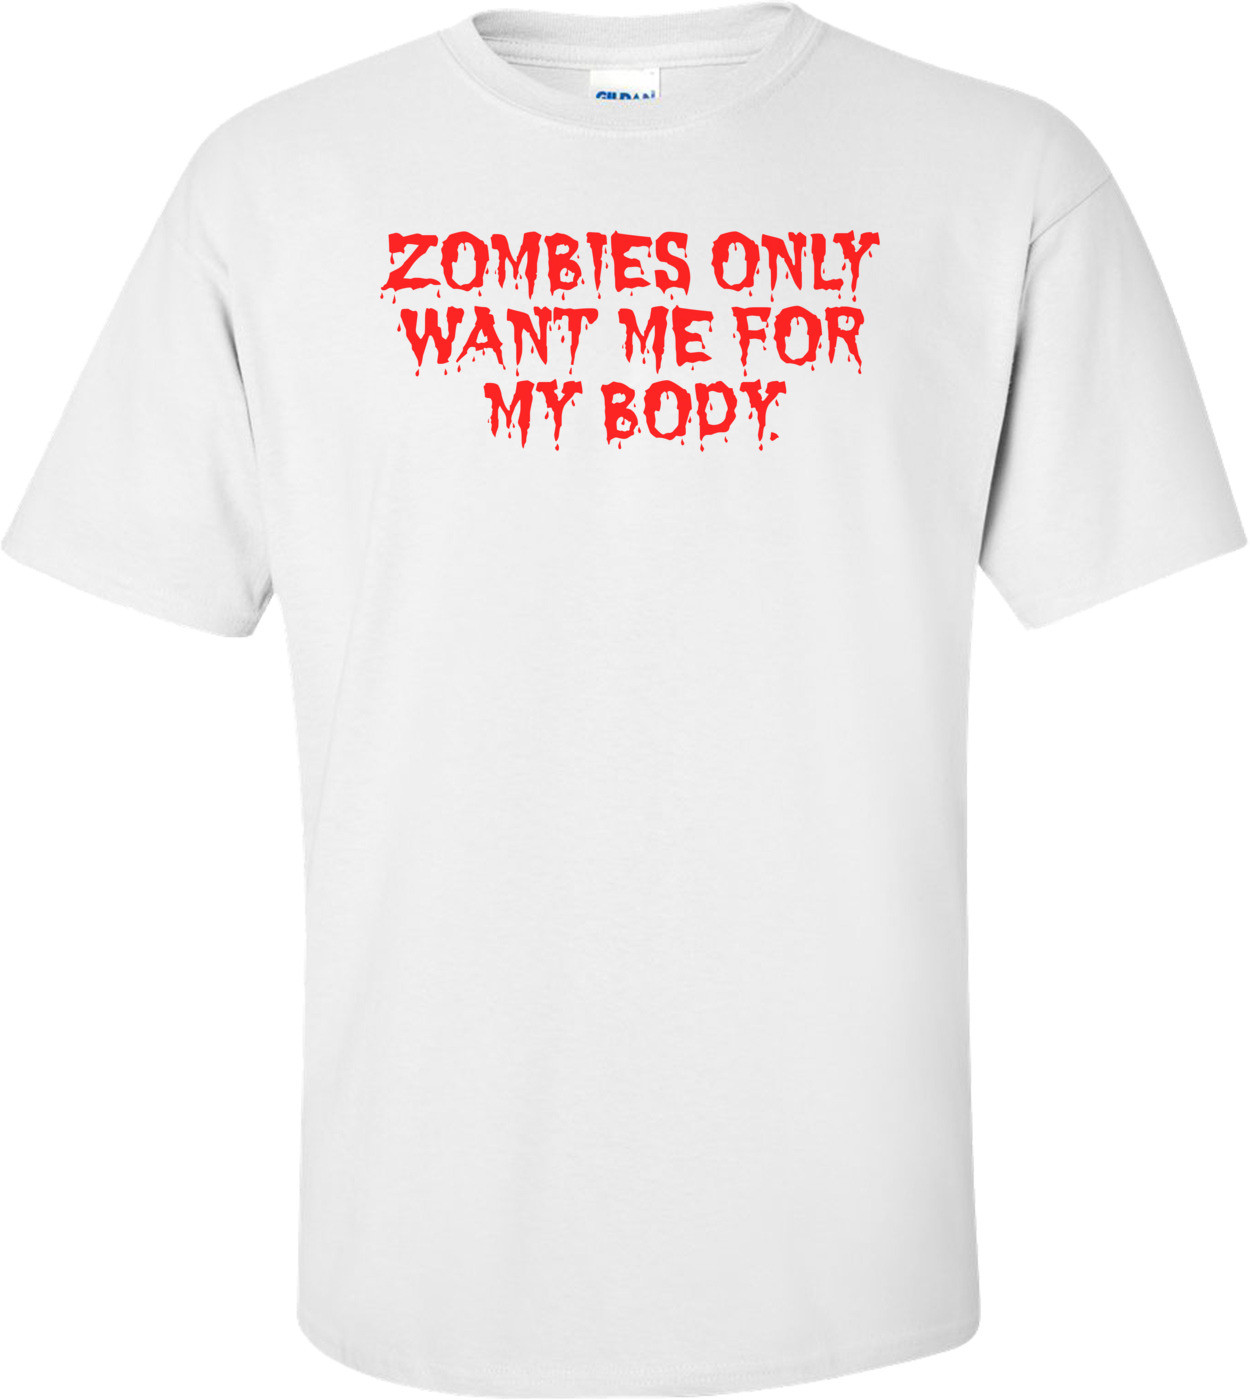 ZOMBIES ONLY WANT ME FOR MY BODY. Shirt